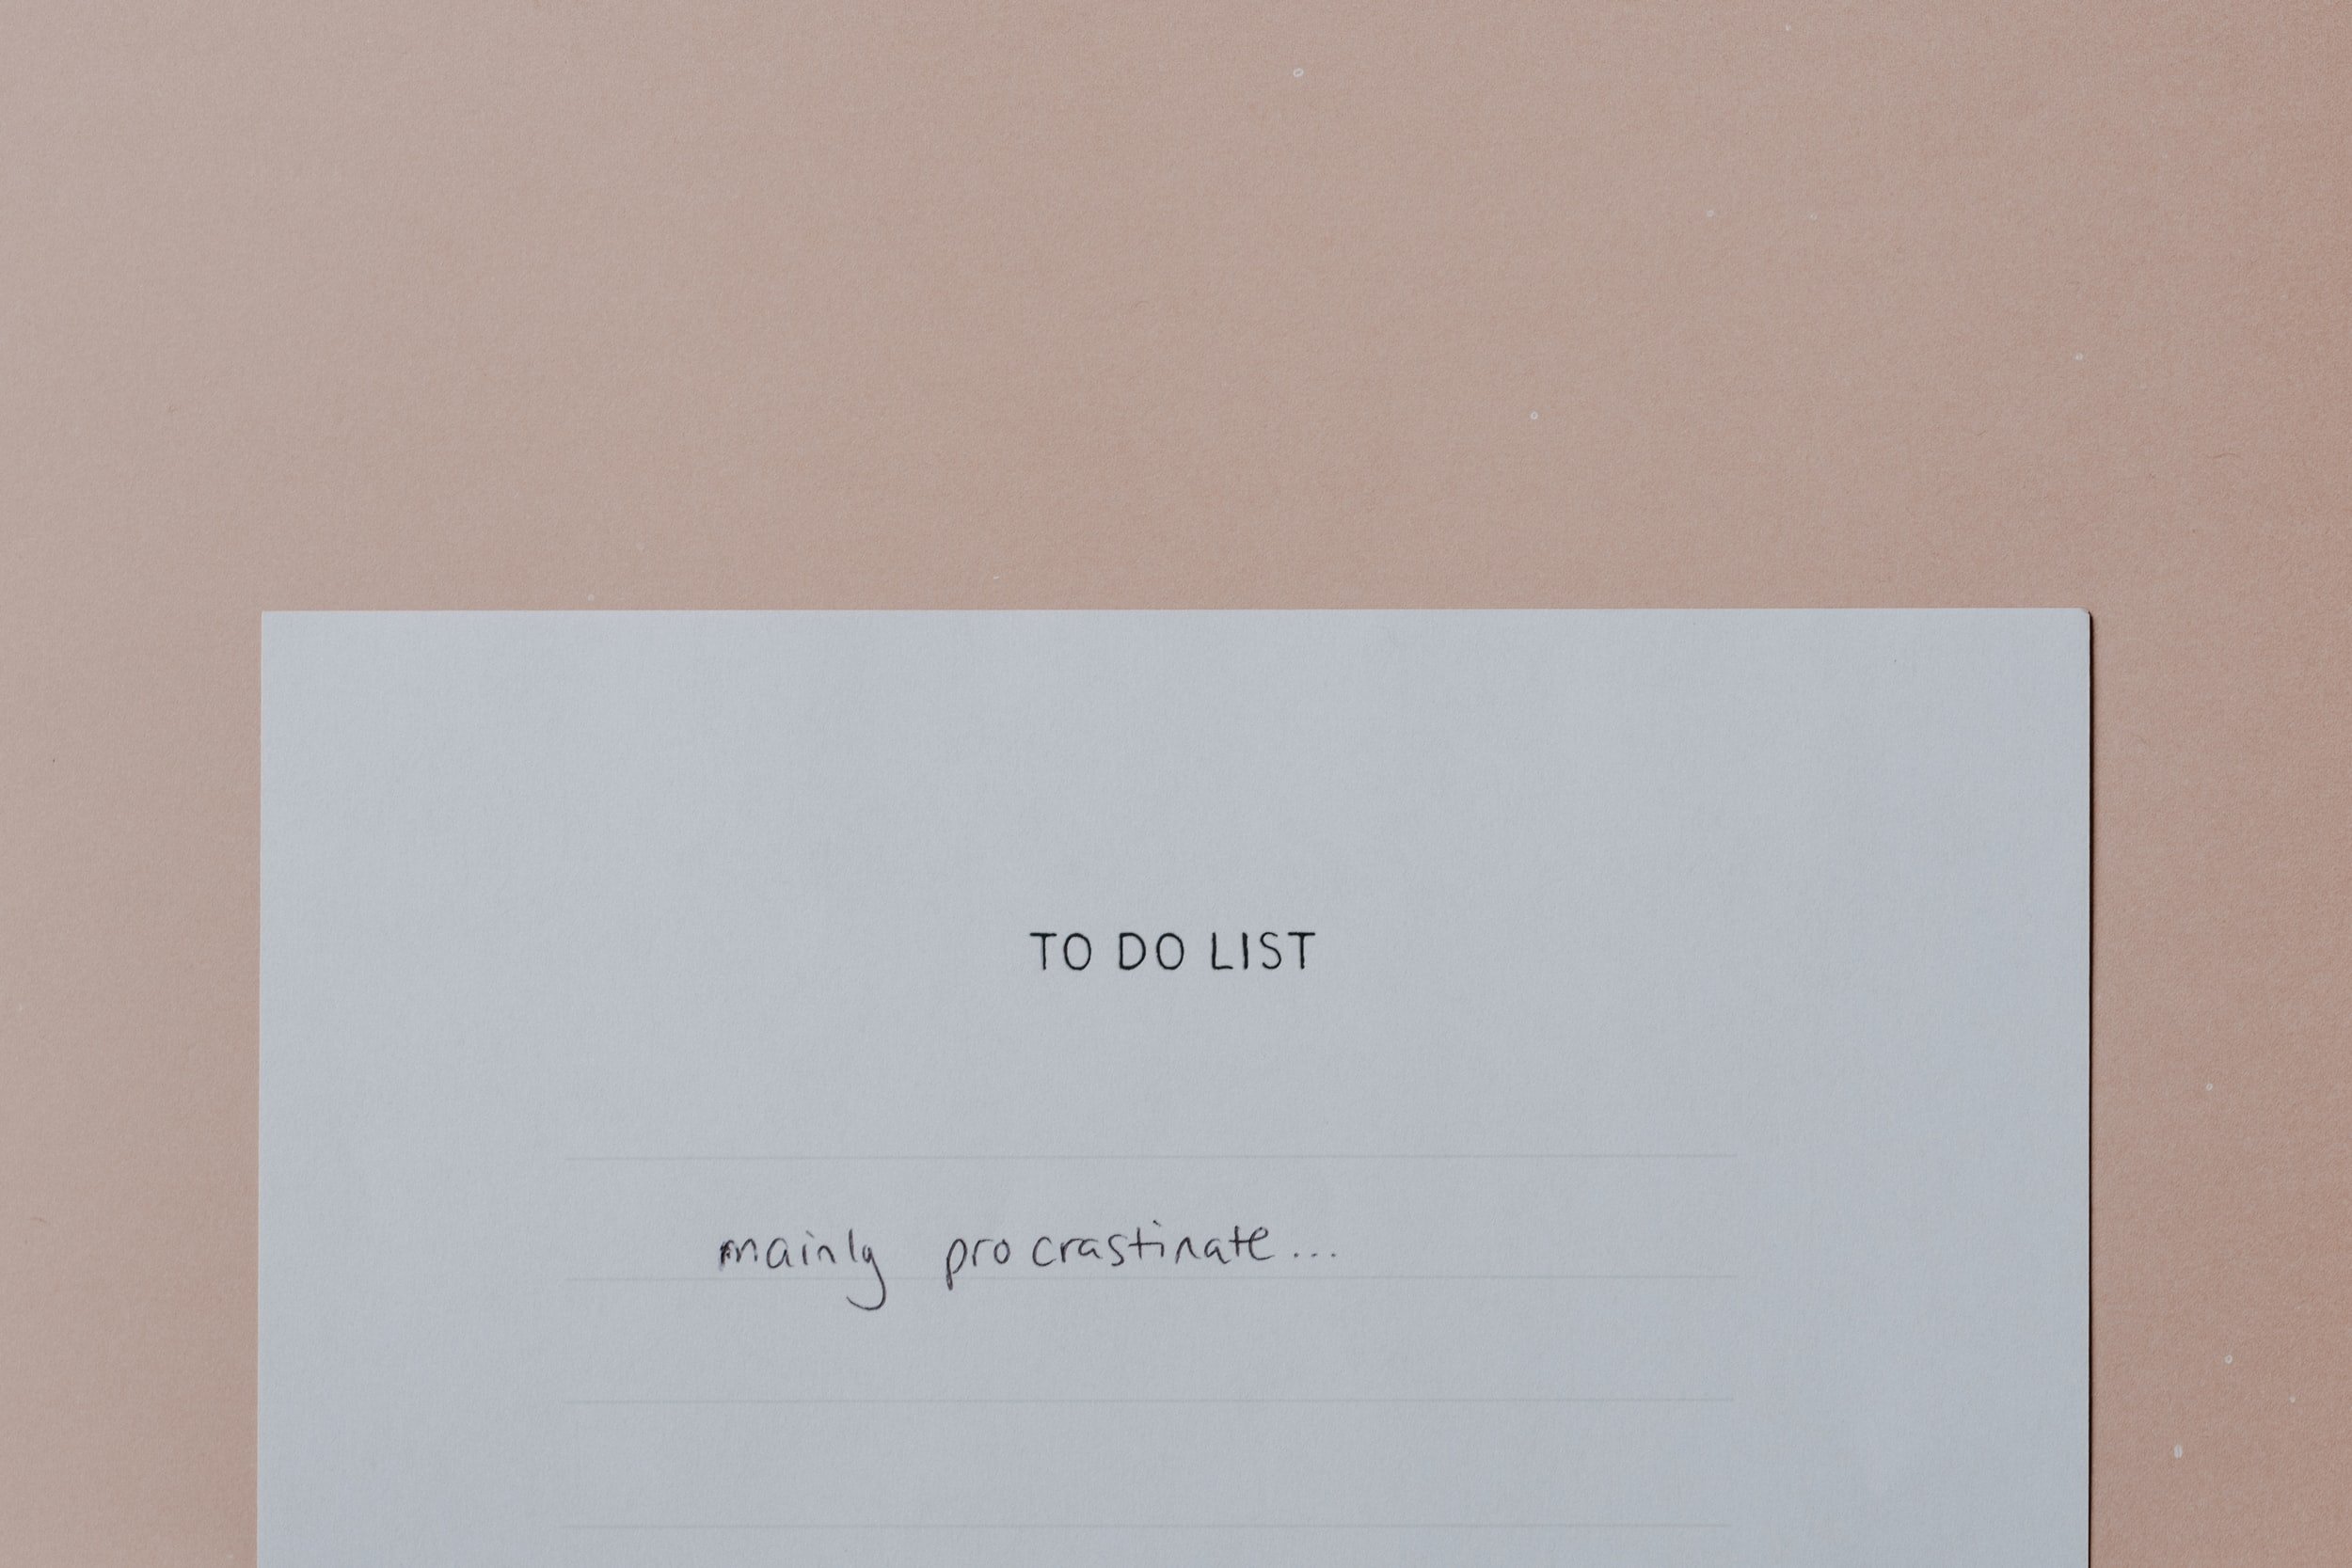 "To do List" written on top of a piece of paper. Below it written "mainly procrastinate".